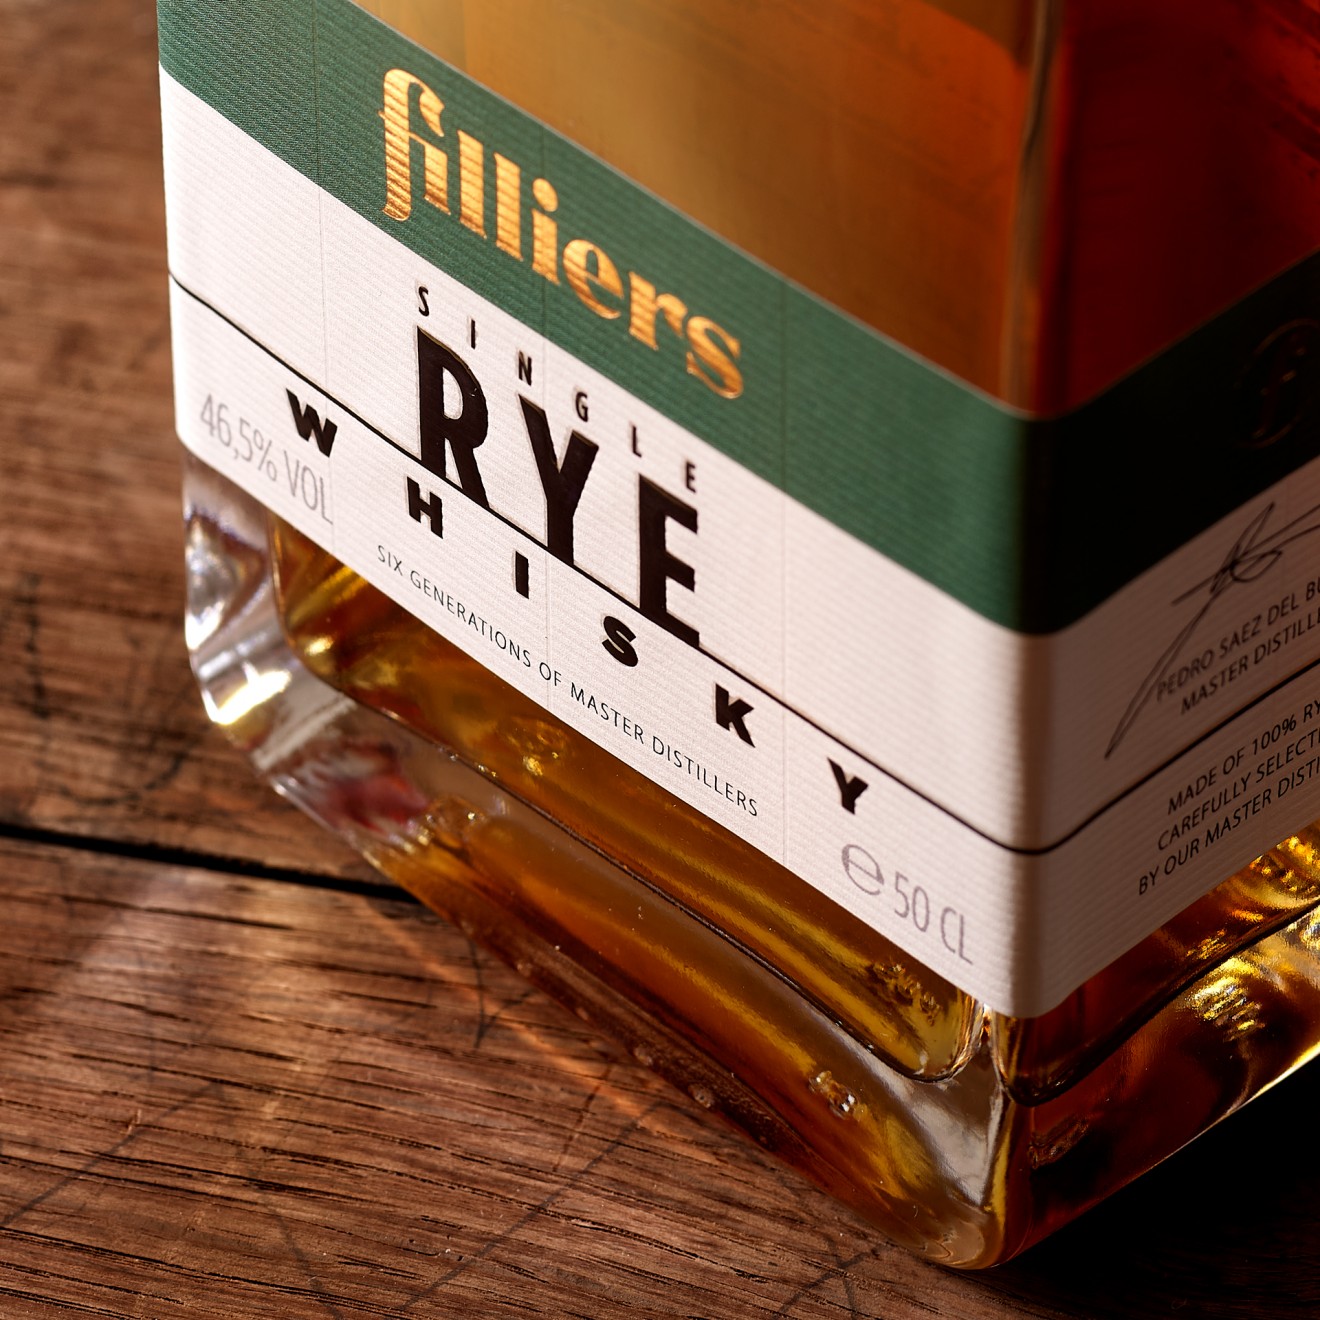 Quatre Mains package design - Rye Whisky packaging design for Filliers